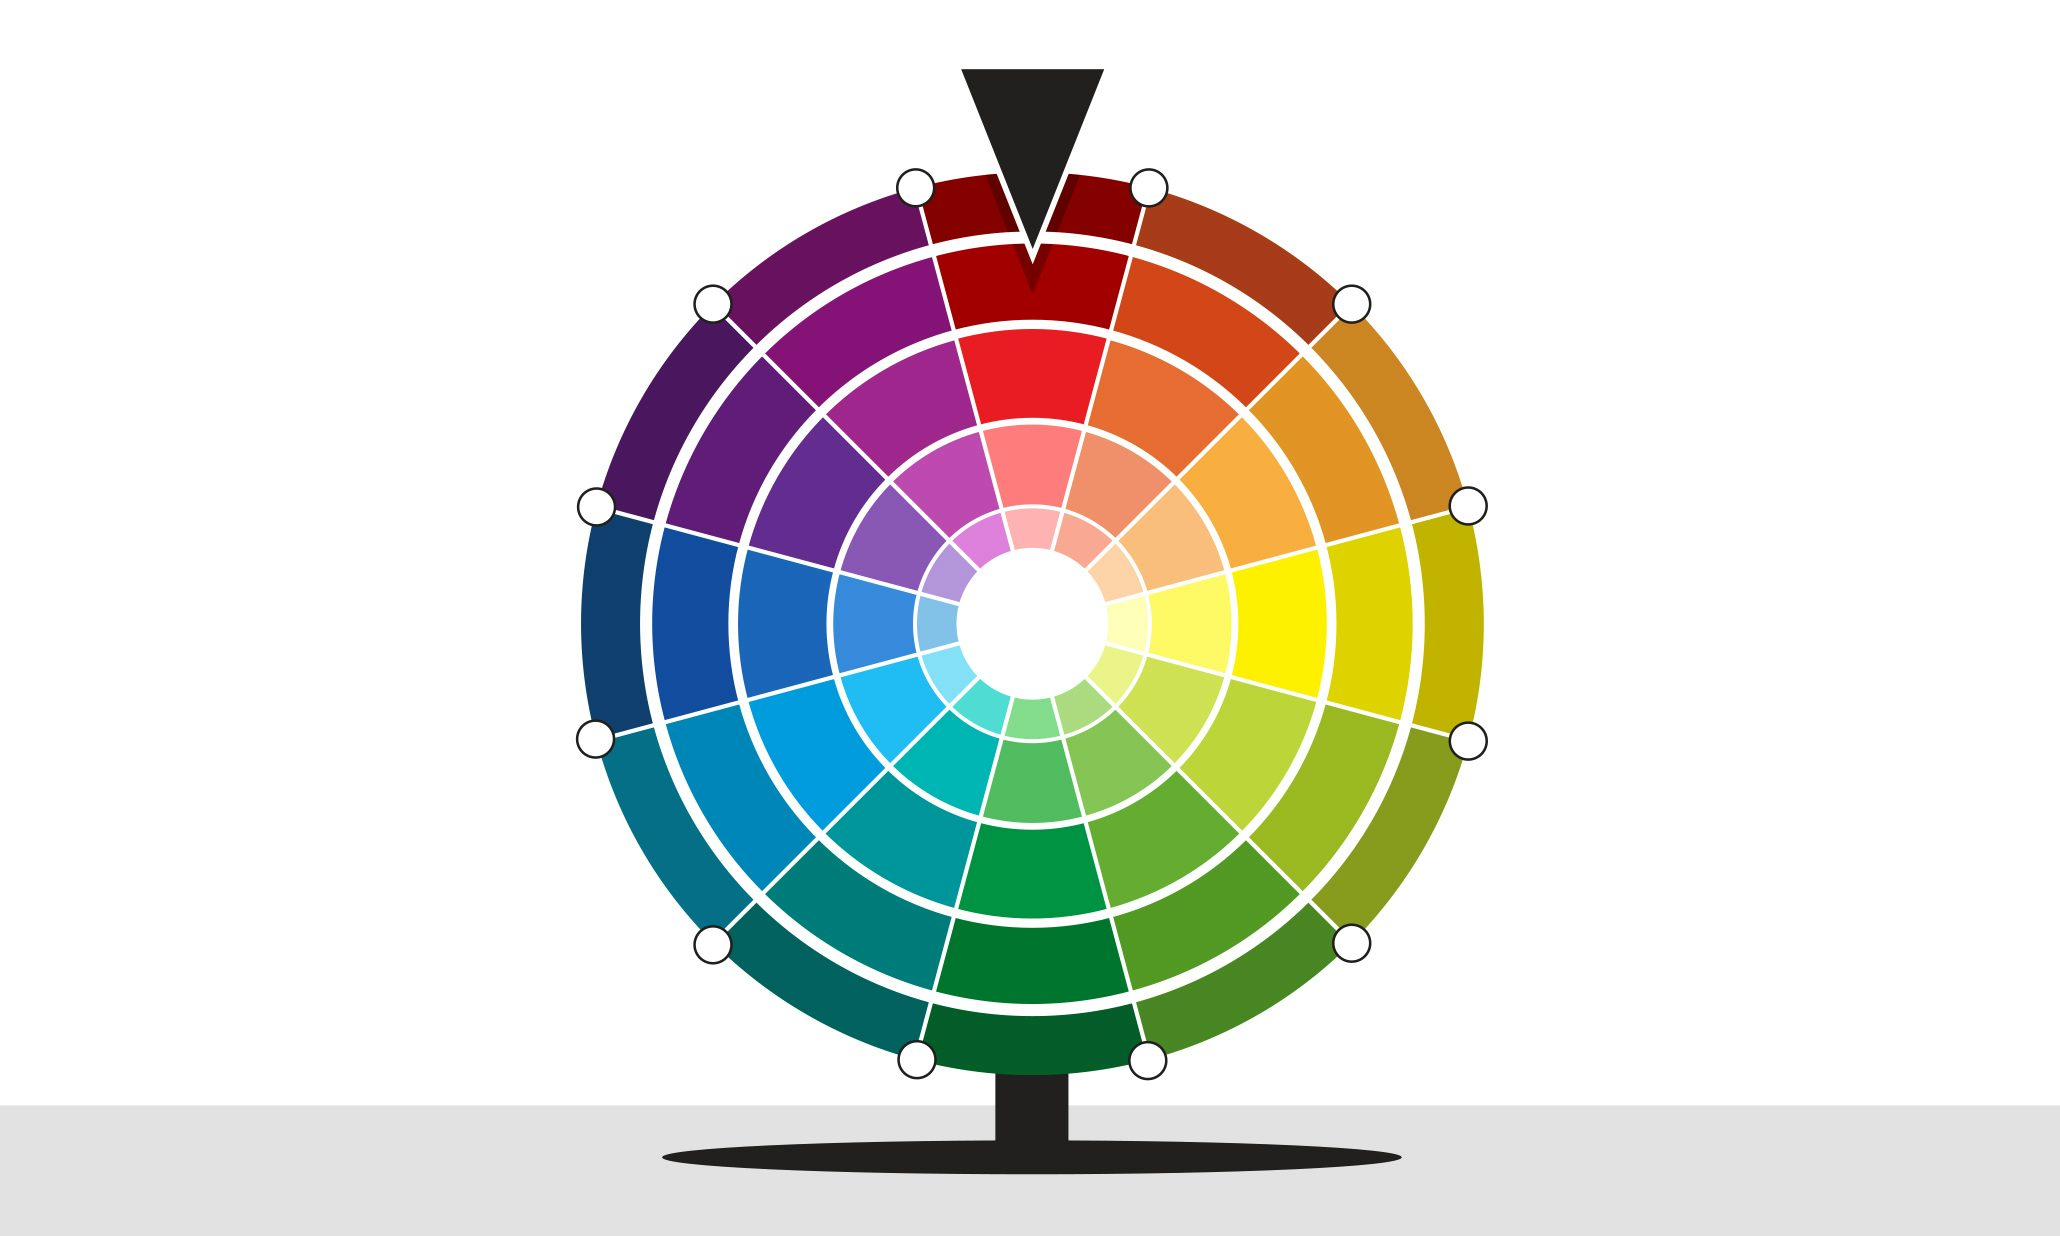 How to Pick the Right Brand Colors for Maximum Impact?